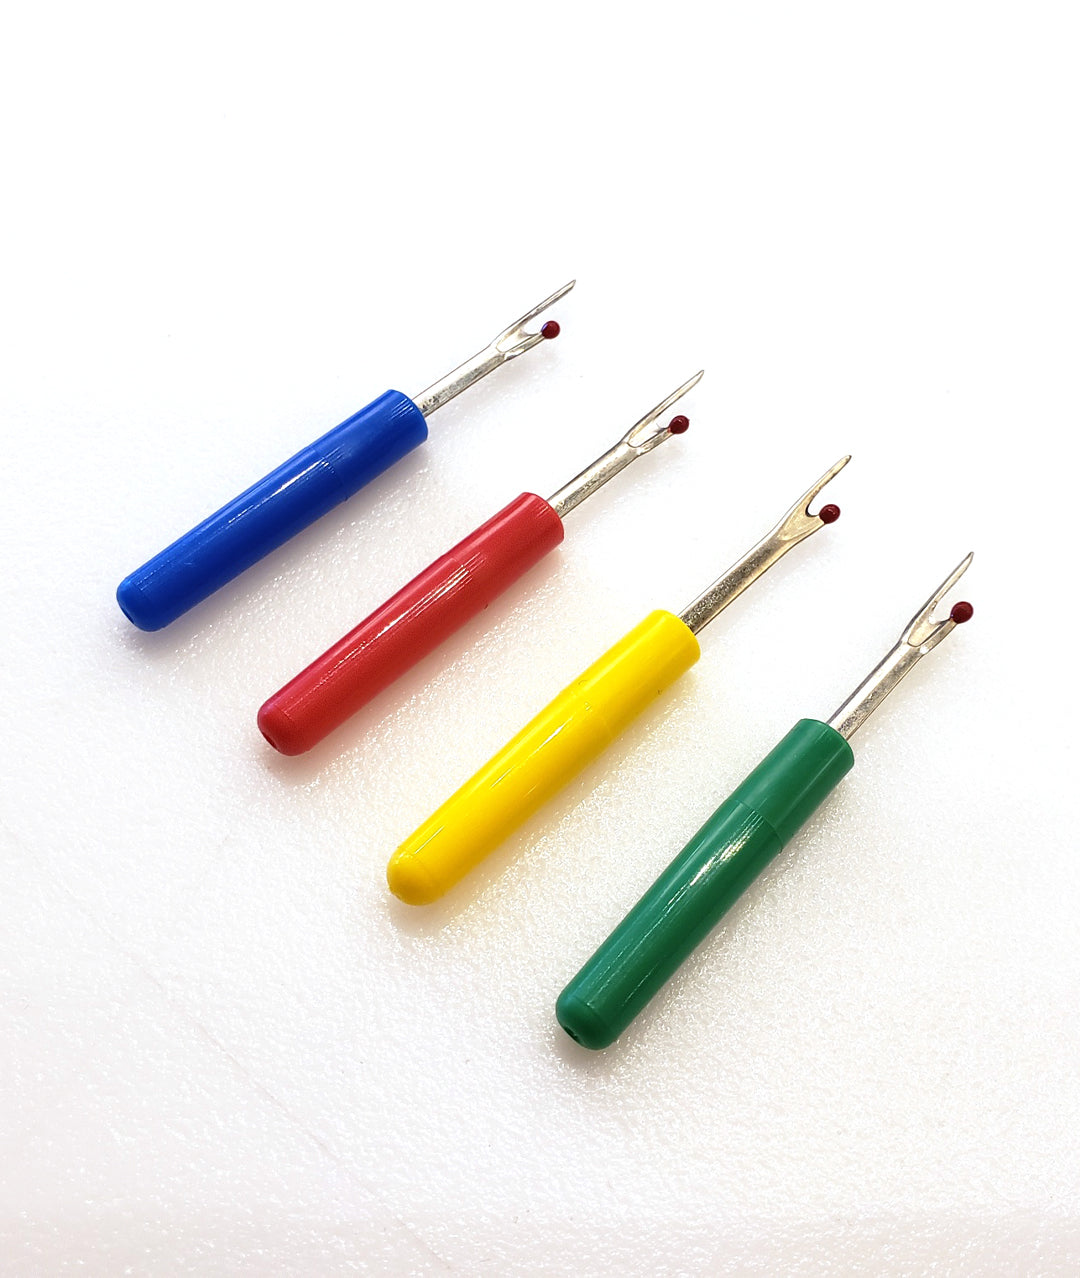 blue, red, yellow and green seam rippers on a white background